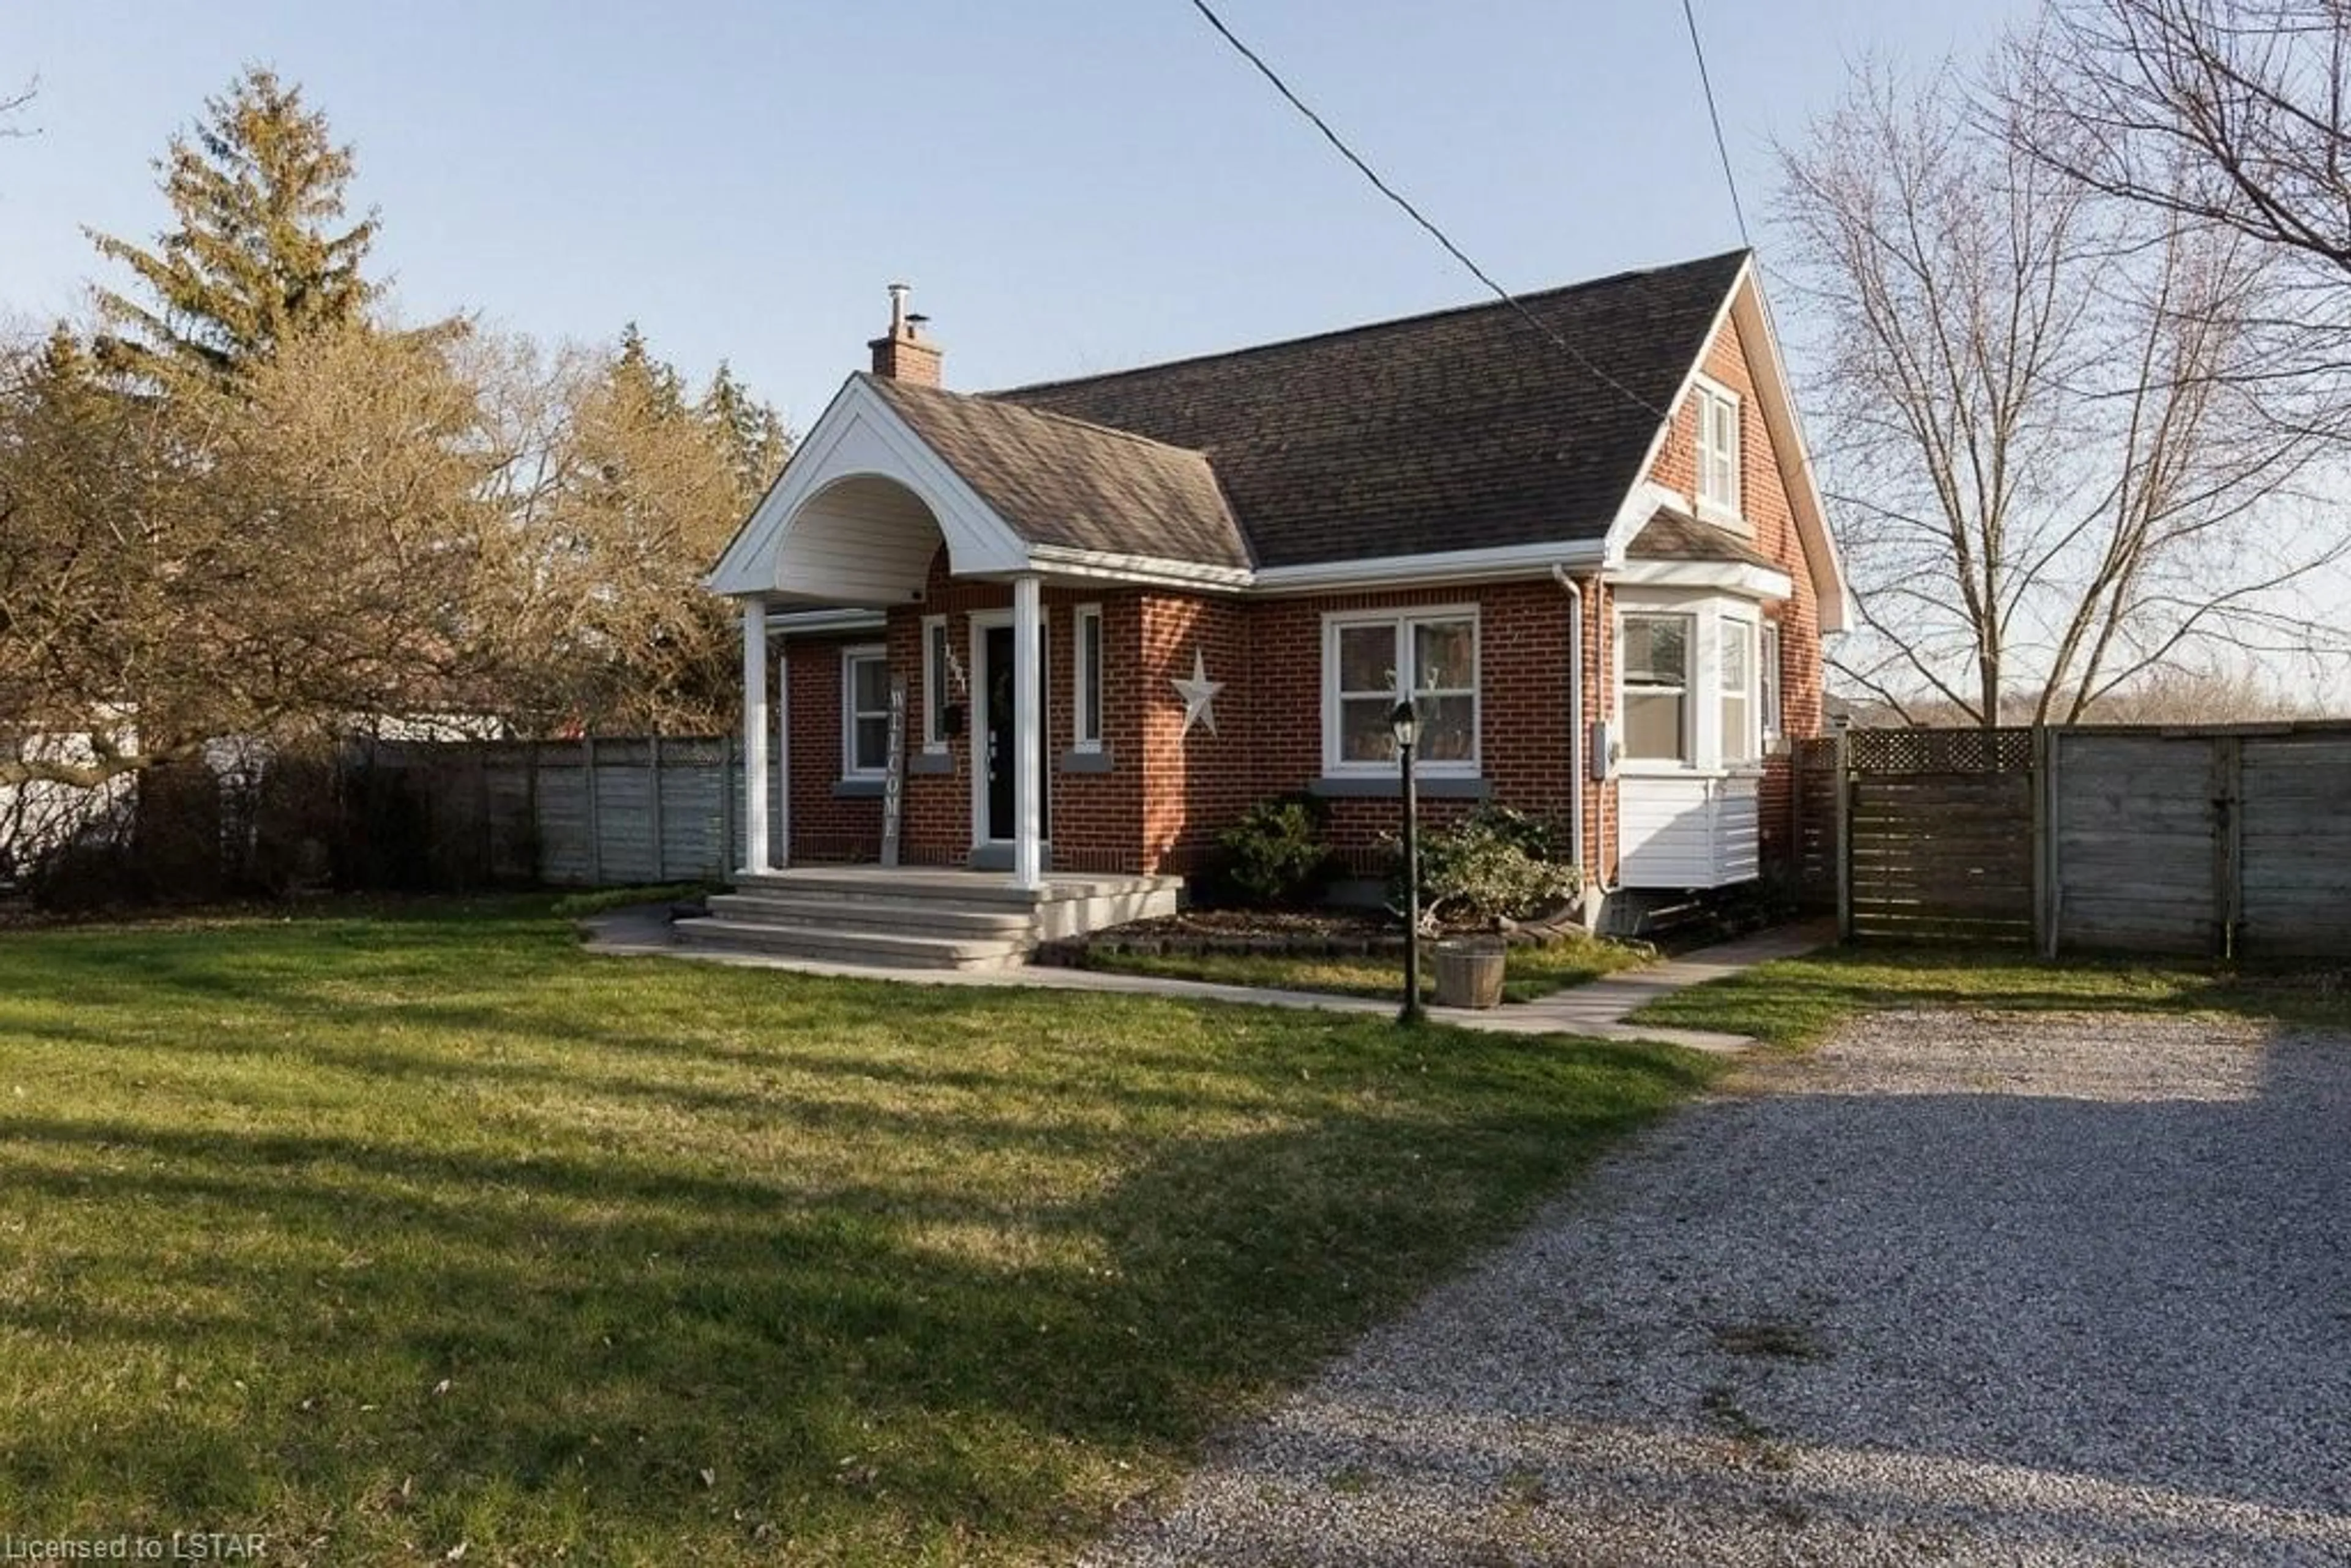 Cottage for 1081 Hamilton Rd, London Ontario N5W 1A7